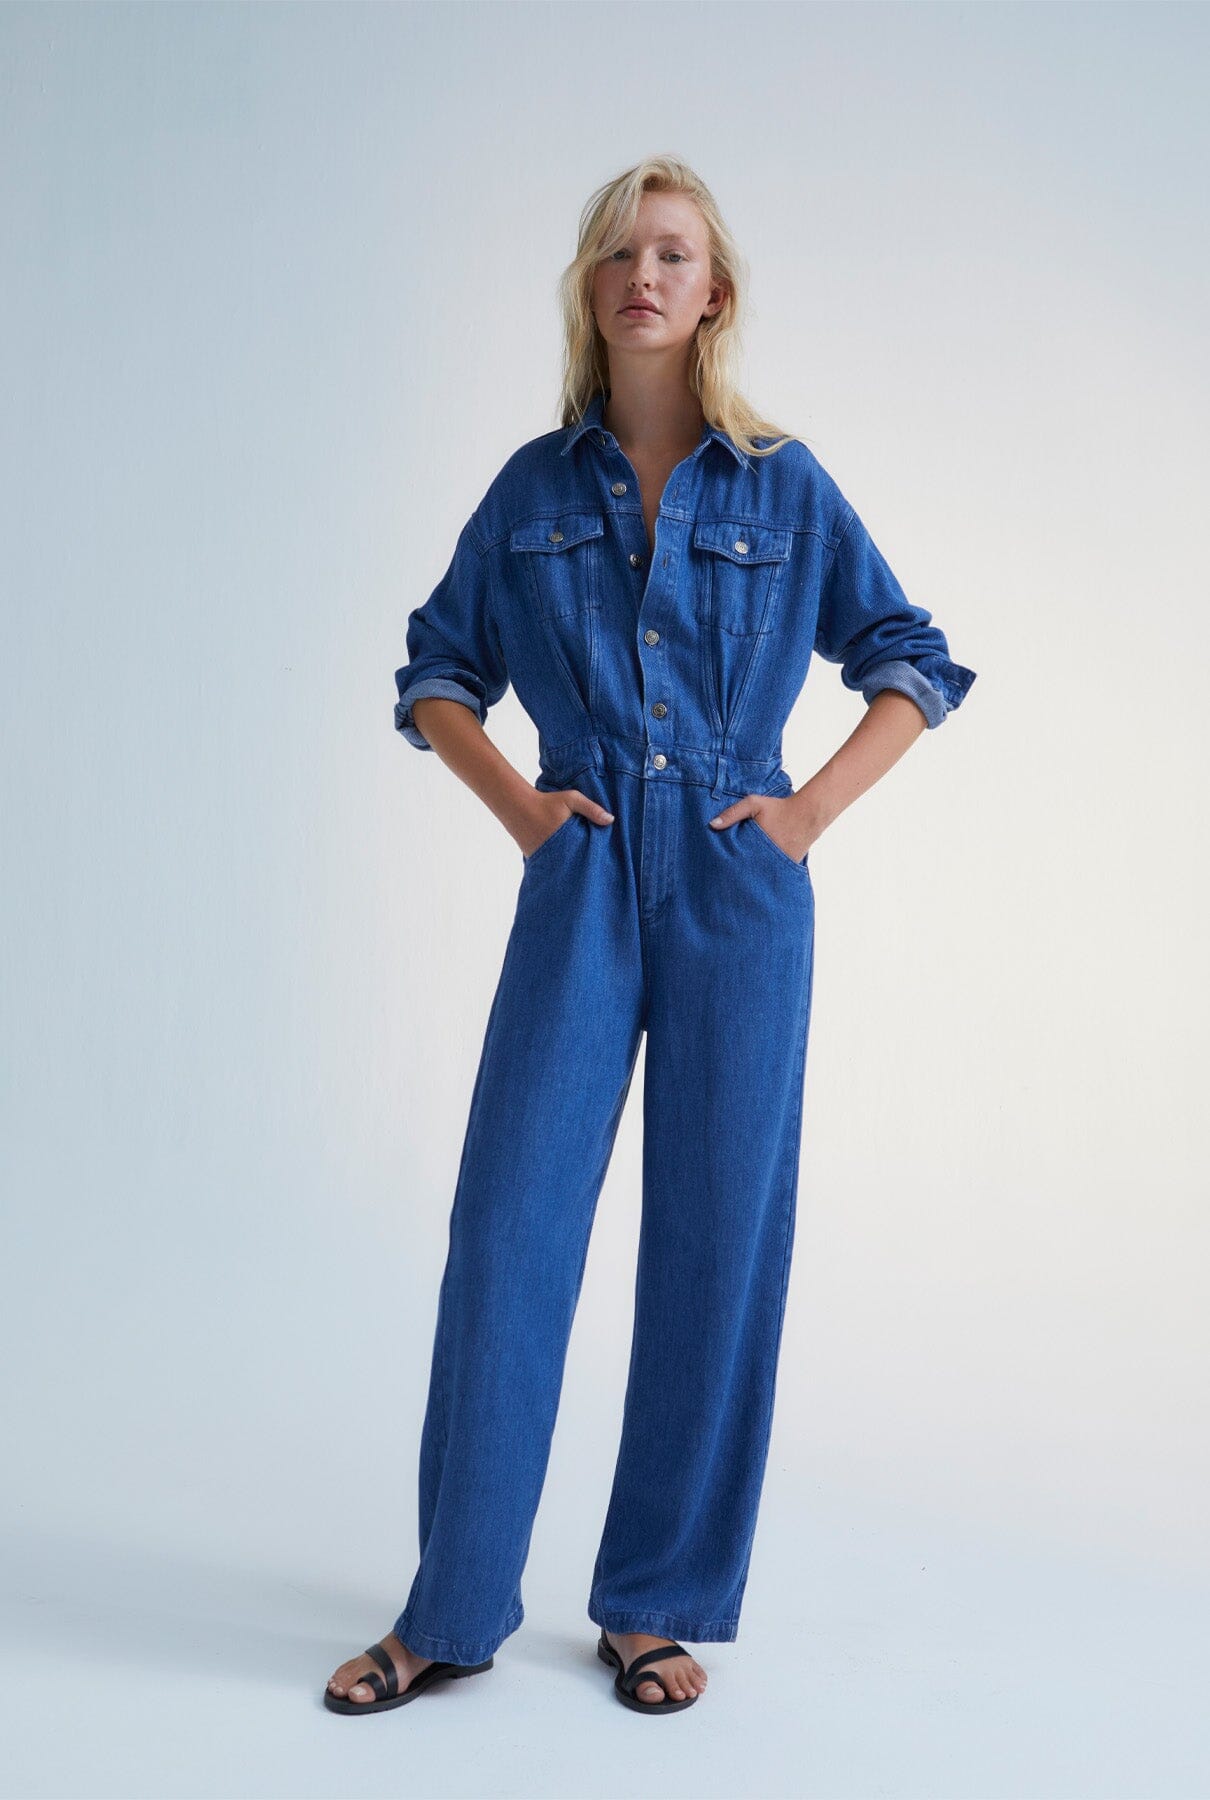 Woodland Denim Woman Jumpsuit Jumpsuits The New Society 